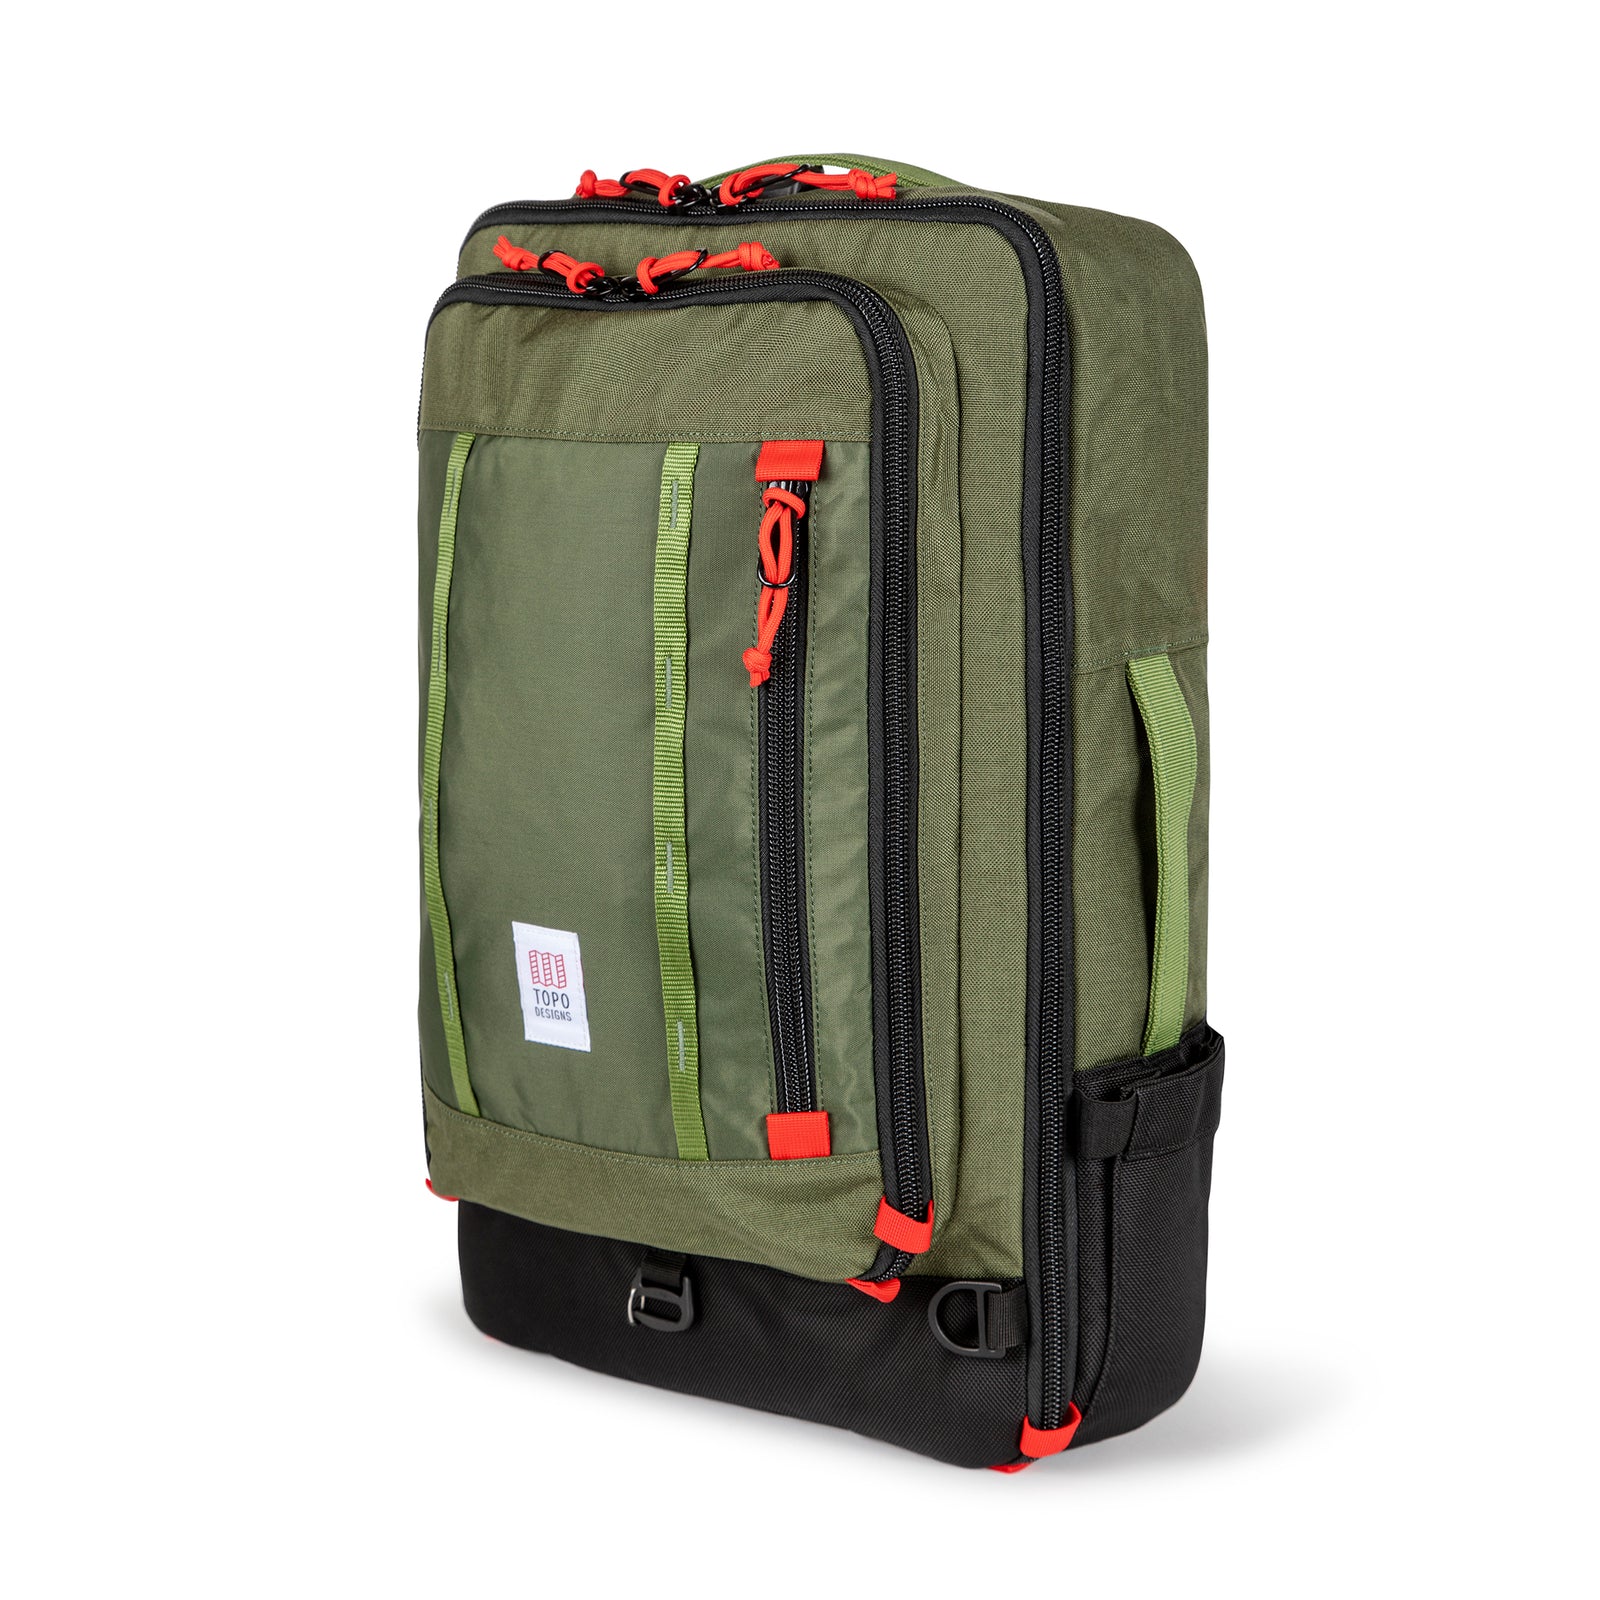 Topo Designs Global Travel Bag 40L Durable Carry On Convertible Laptop Travel Backpack in "Olive" green.